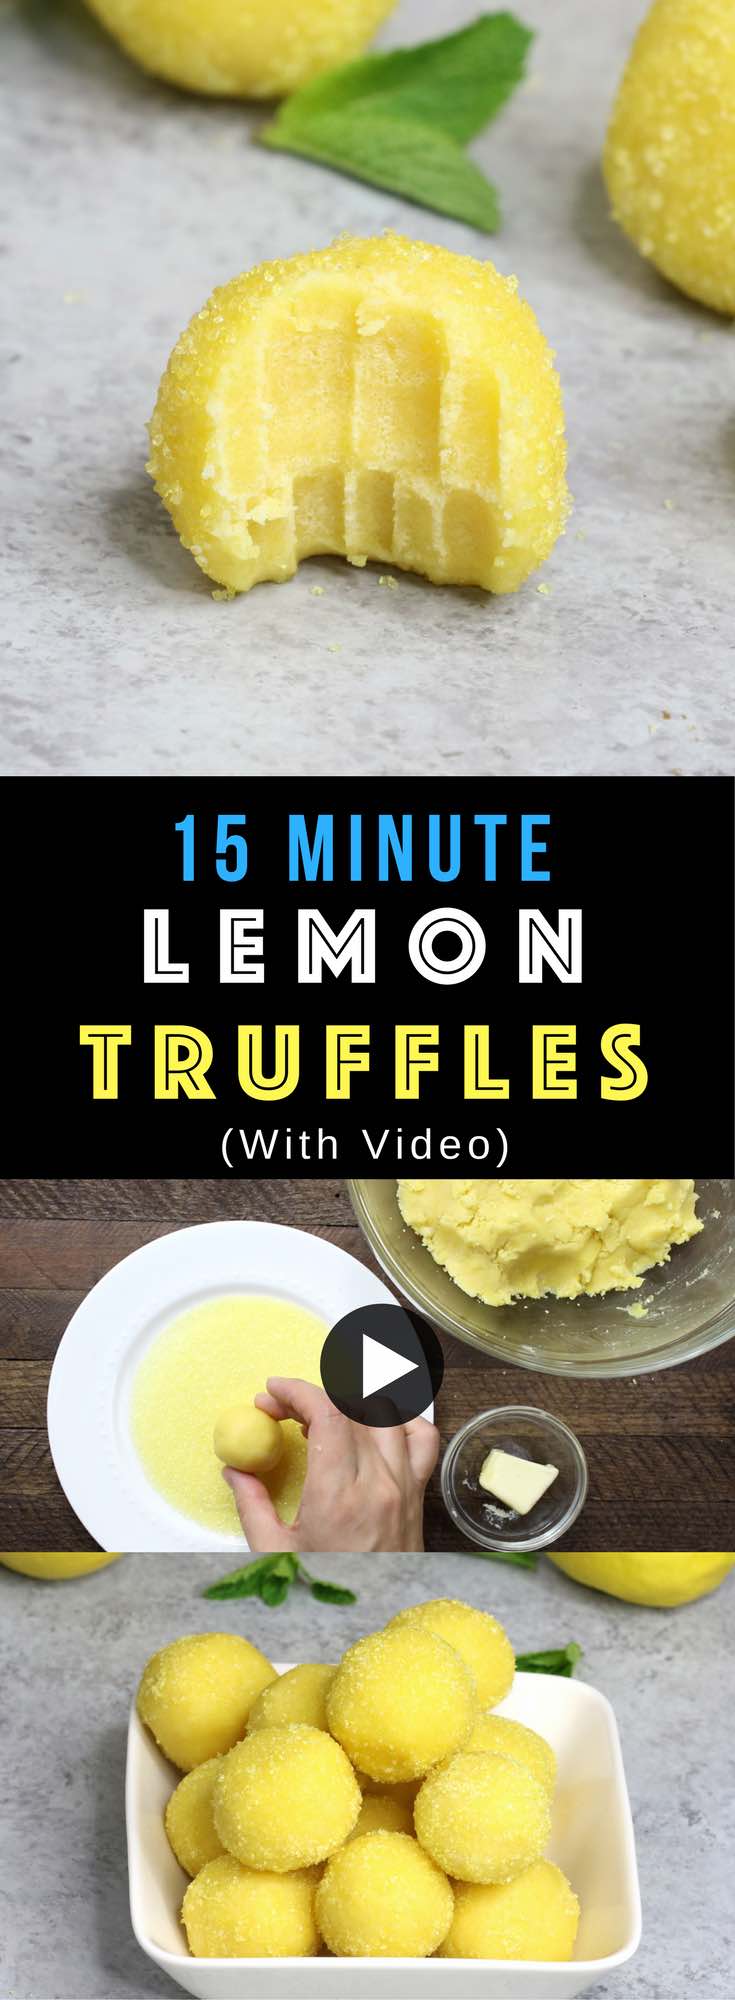 Super Easy Lemon Truffles – these flavorful lemon cake batter truffles are so easy to make and they look absolutely beautiful! It takes only 15 minutes. All you need is only 5 simple ingredients: lemon cake mix, butter, sugar, lemon and yellow sprinkles. Quick and easy recipe. Dessert, party recipe. Vegetarian. Video recipe. | Tipbuzz.com